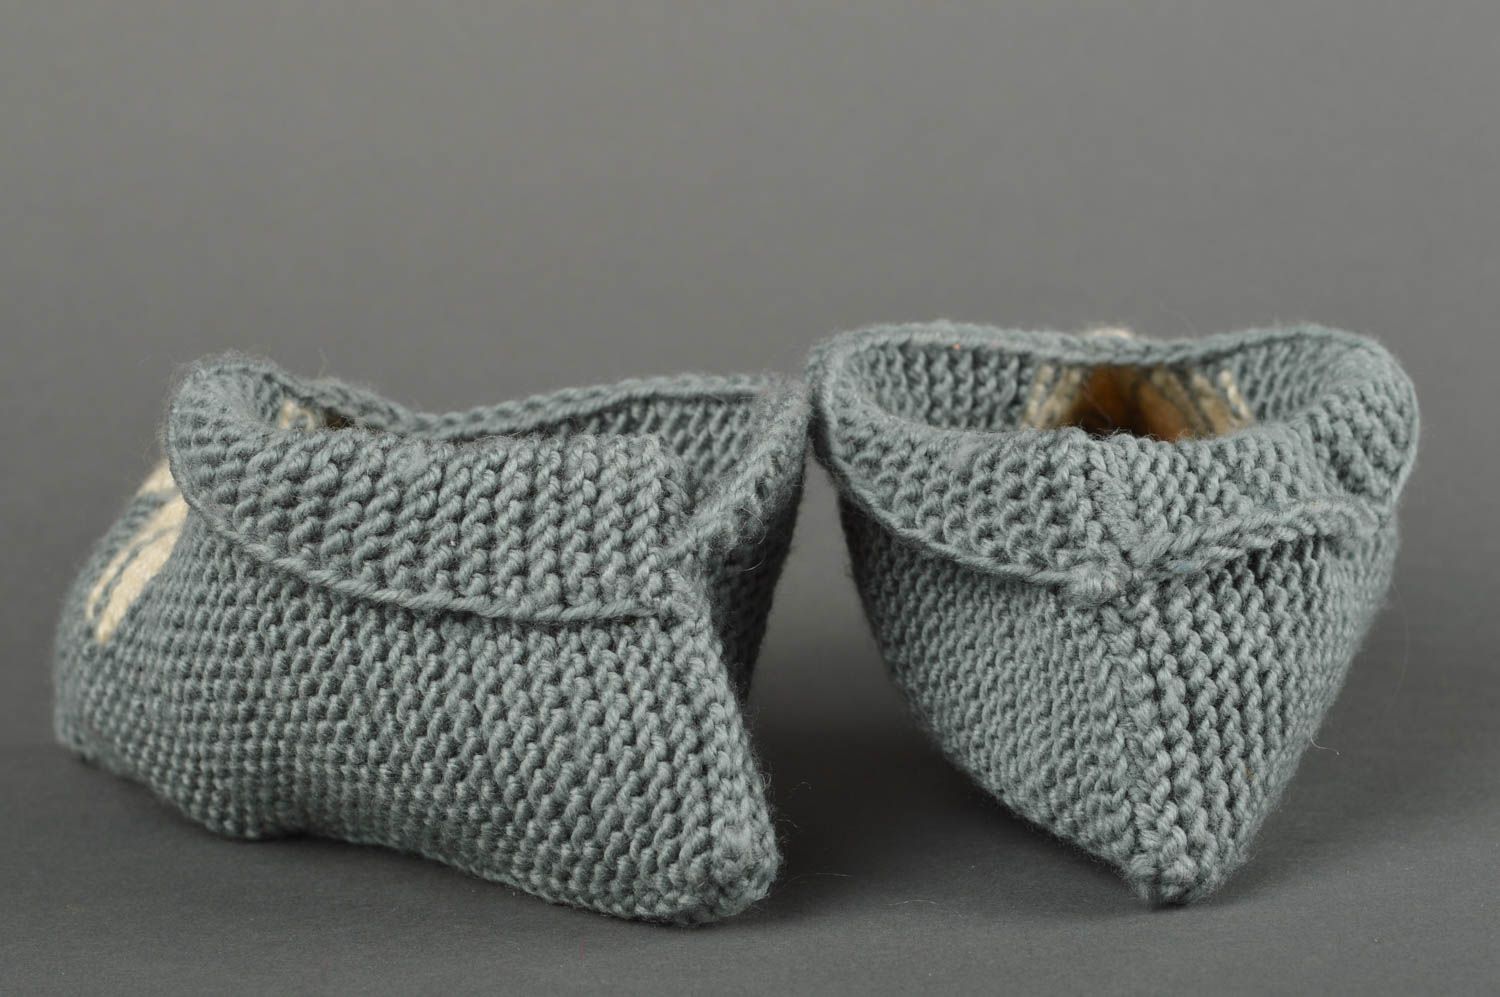 Handmade slippers warm woolen slippers for home stylish accessories for boys photo 4